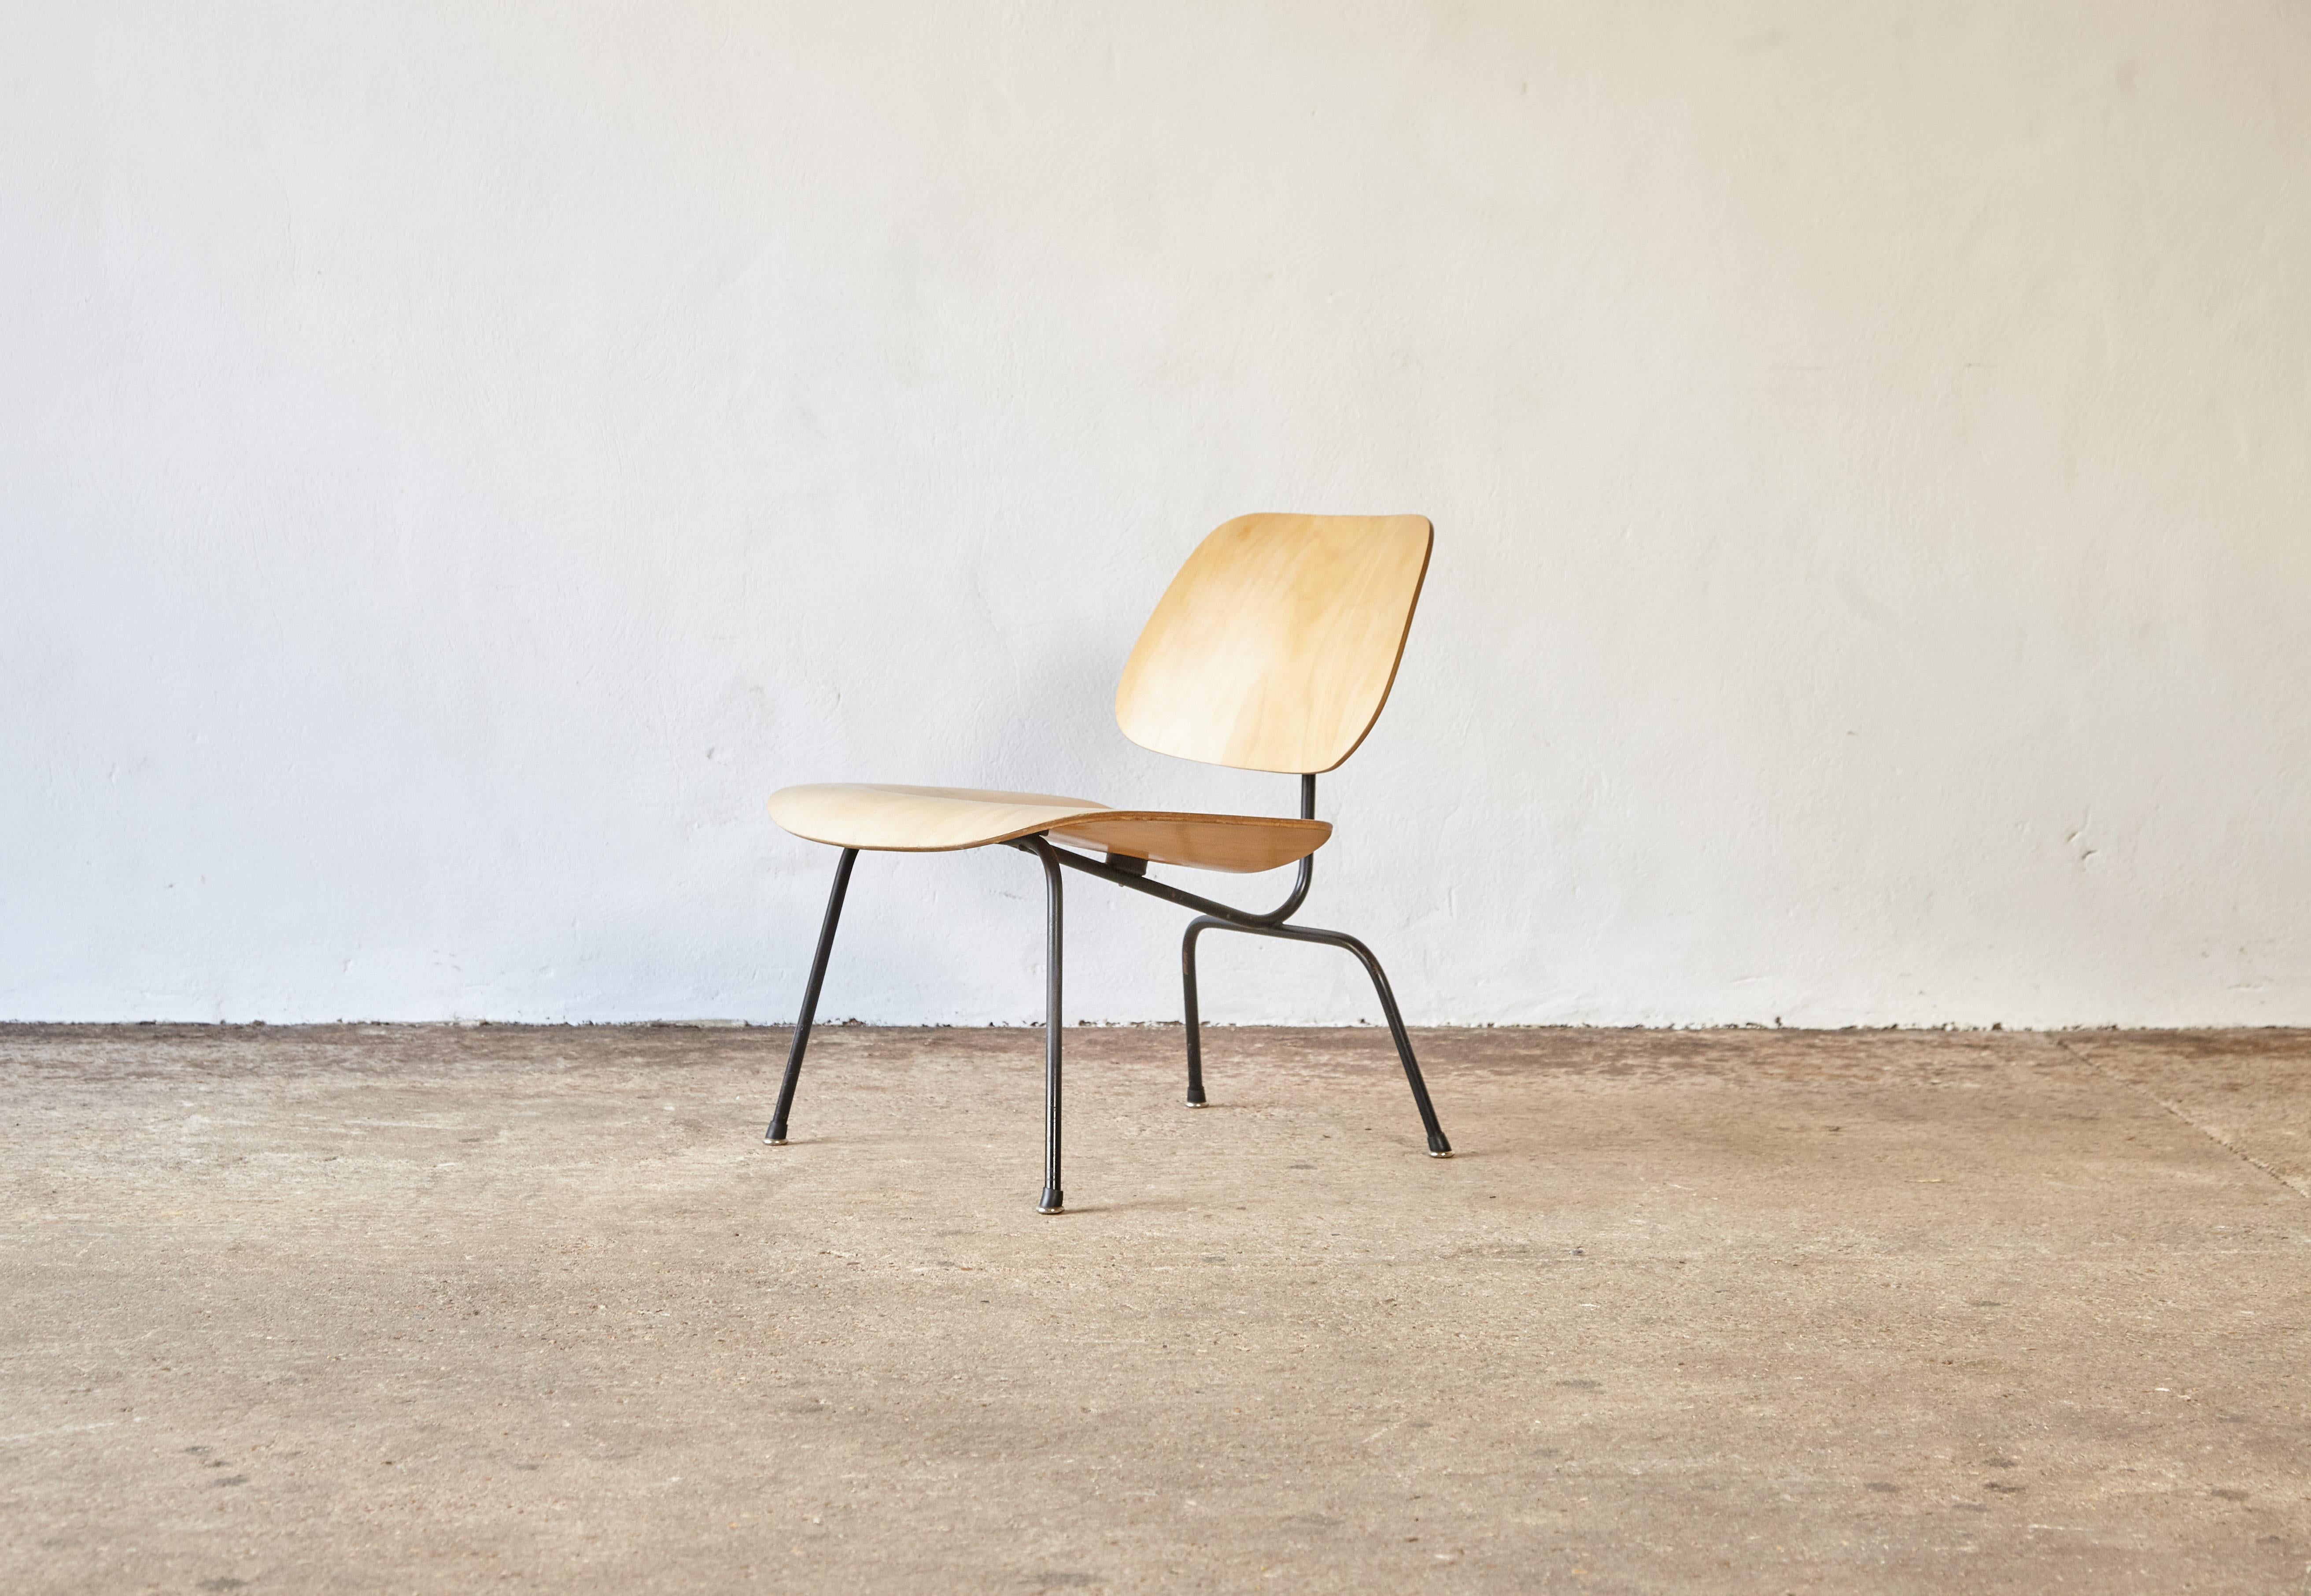 An Eames LCM lounge chair, Herman Miller, USA, 1950s. Ash plywood, chrome-plated steel and original rubber feet caps. With manufacturers label.

Wear consistent with age and use. Structurally sound. Fast shipping worldwide.





  